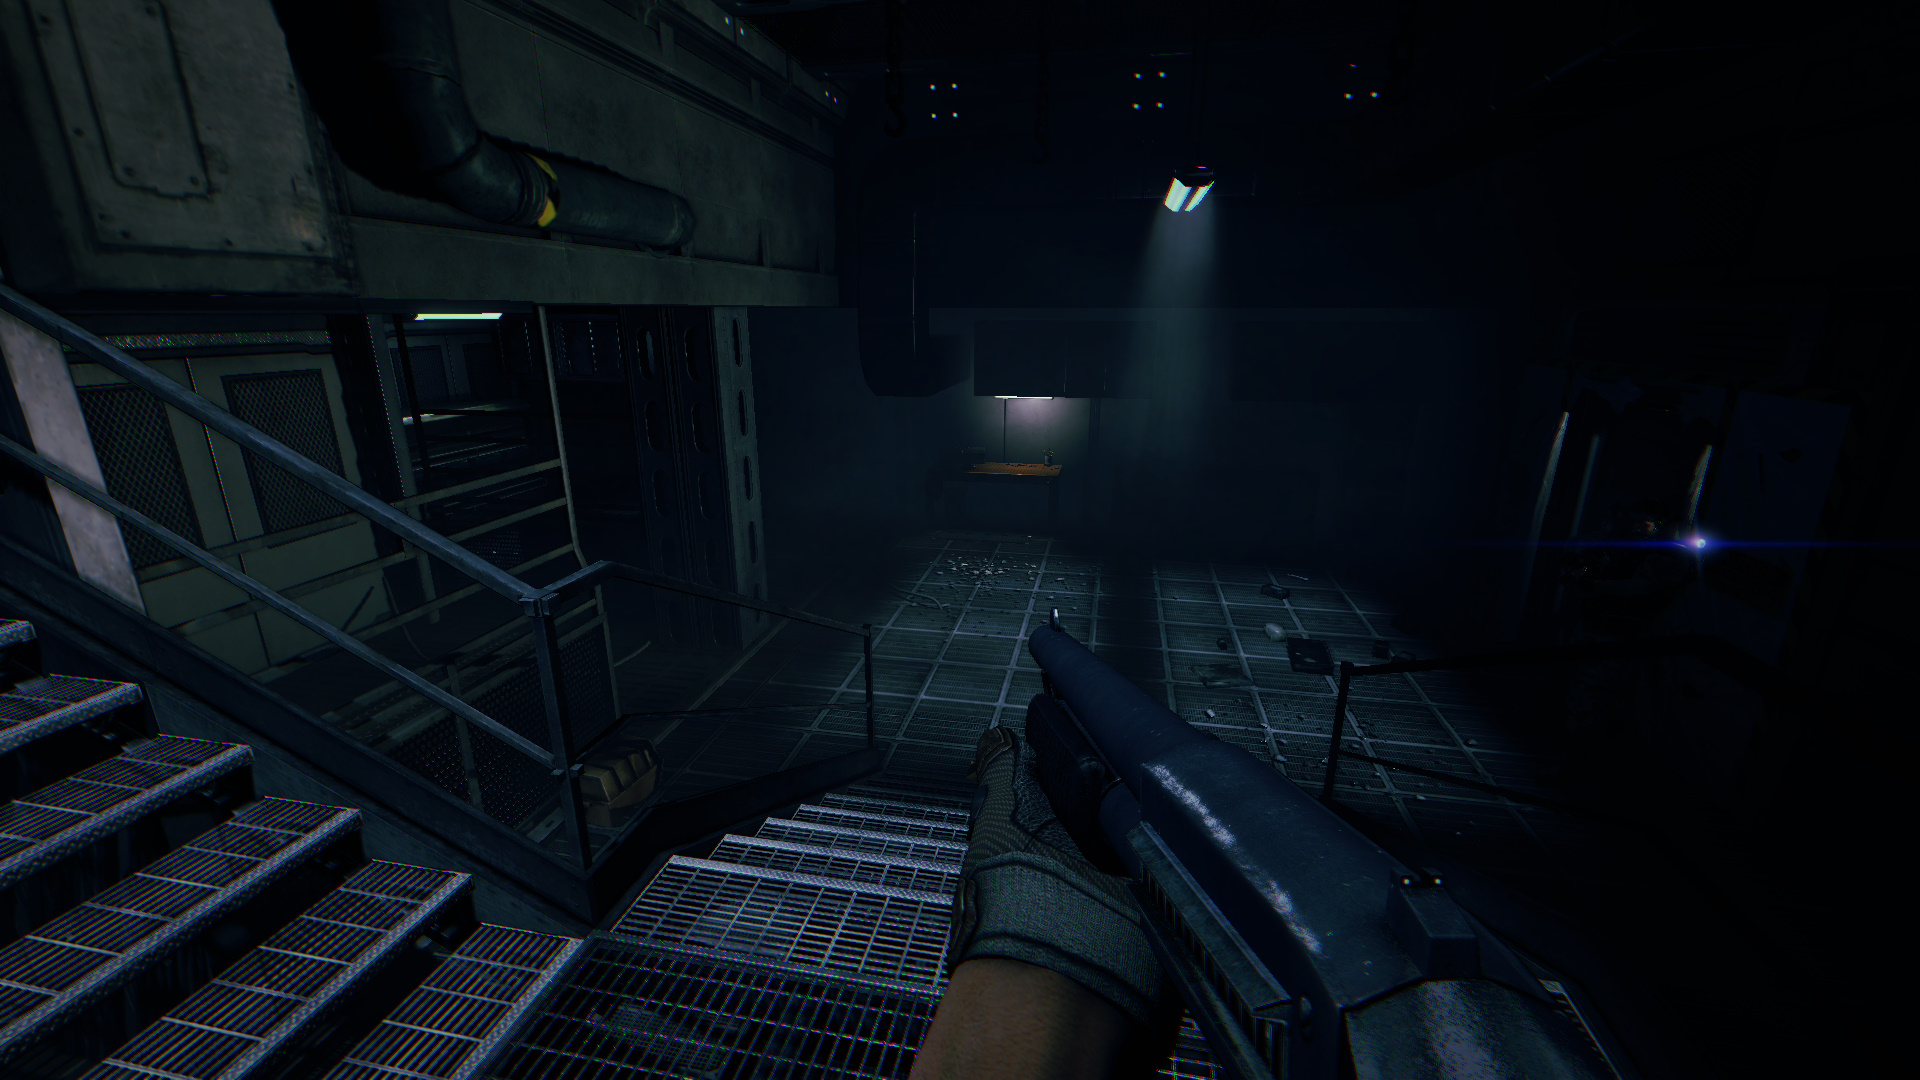 aliens colonial marines graphics mod